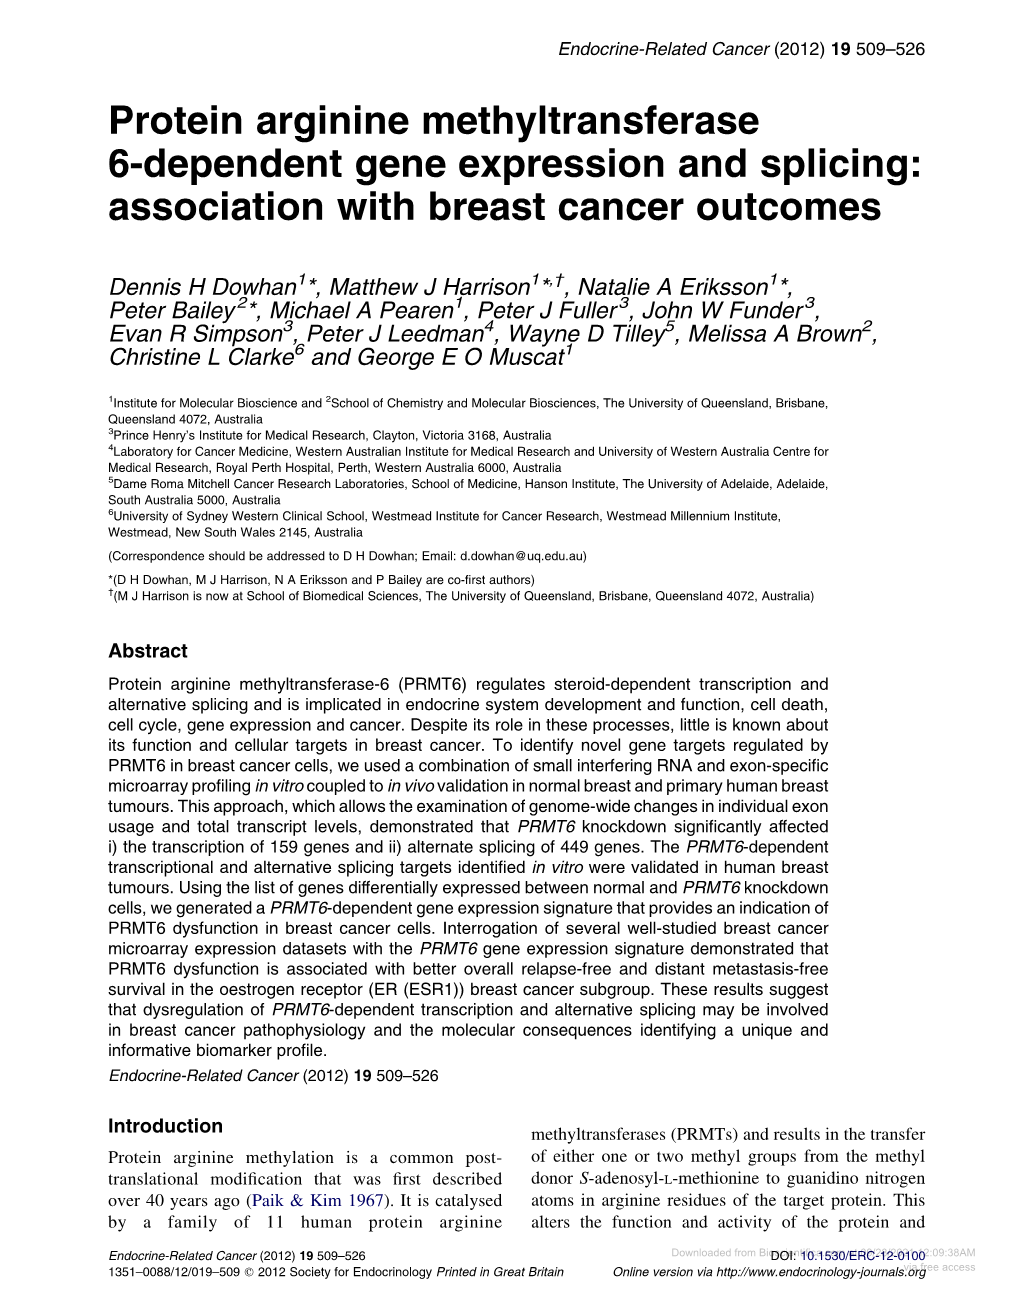 Protein Arginine Methyltransferase 6-Dependent Gene Expression and Splicing: Association with Breast Cancer Outcomes